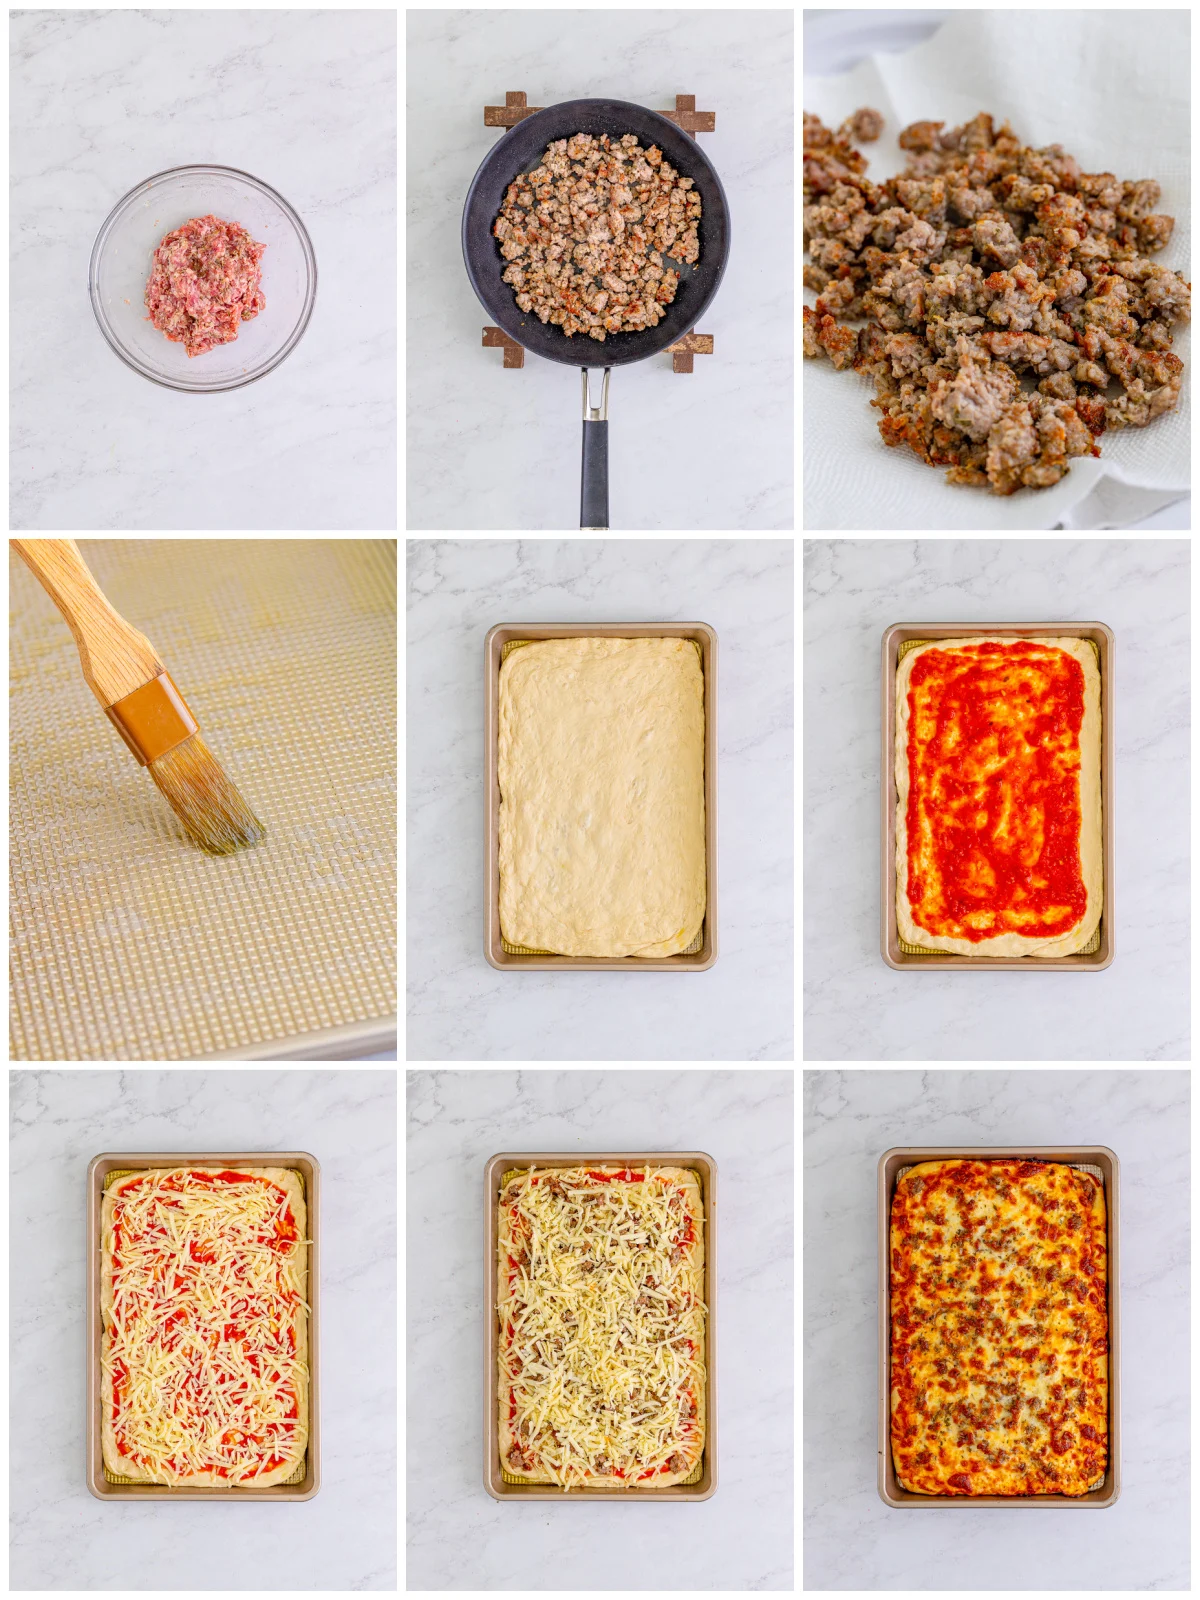 Step by step photos on how to make Sheet Pan Pizza.